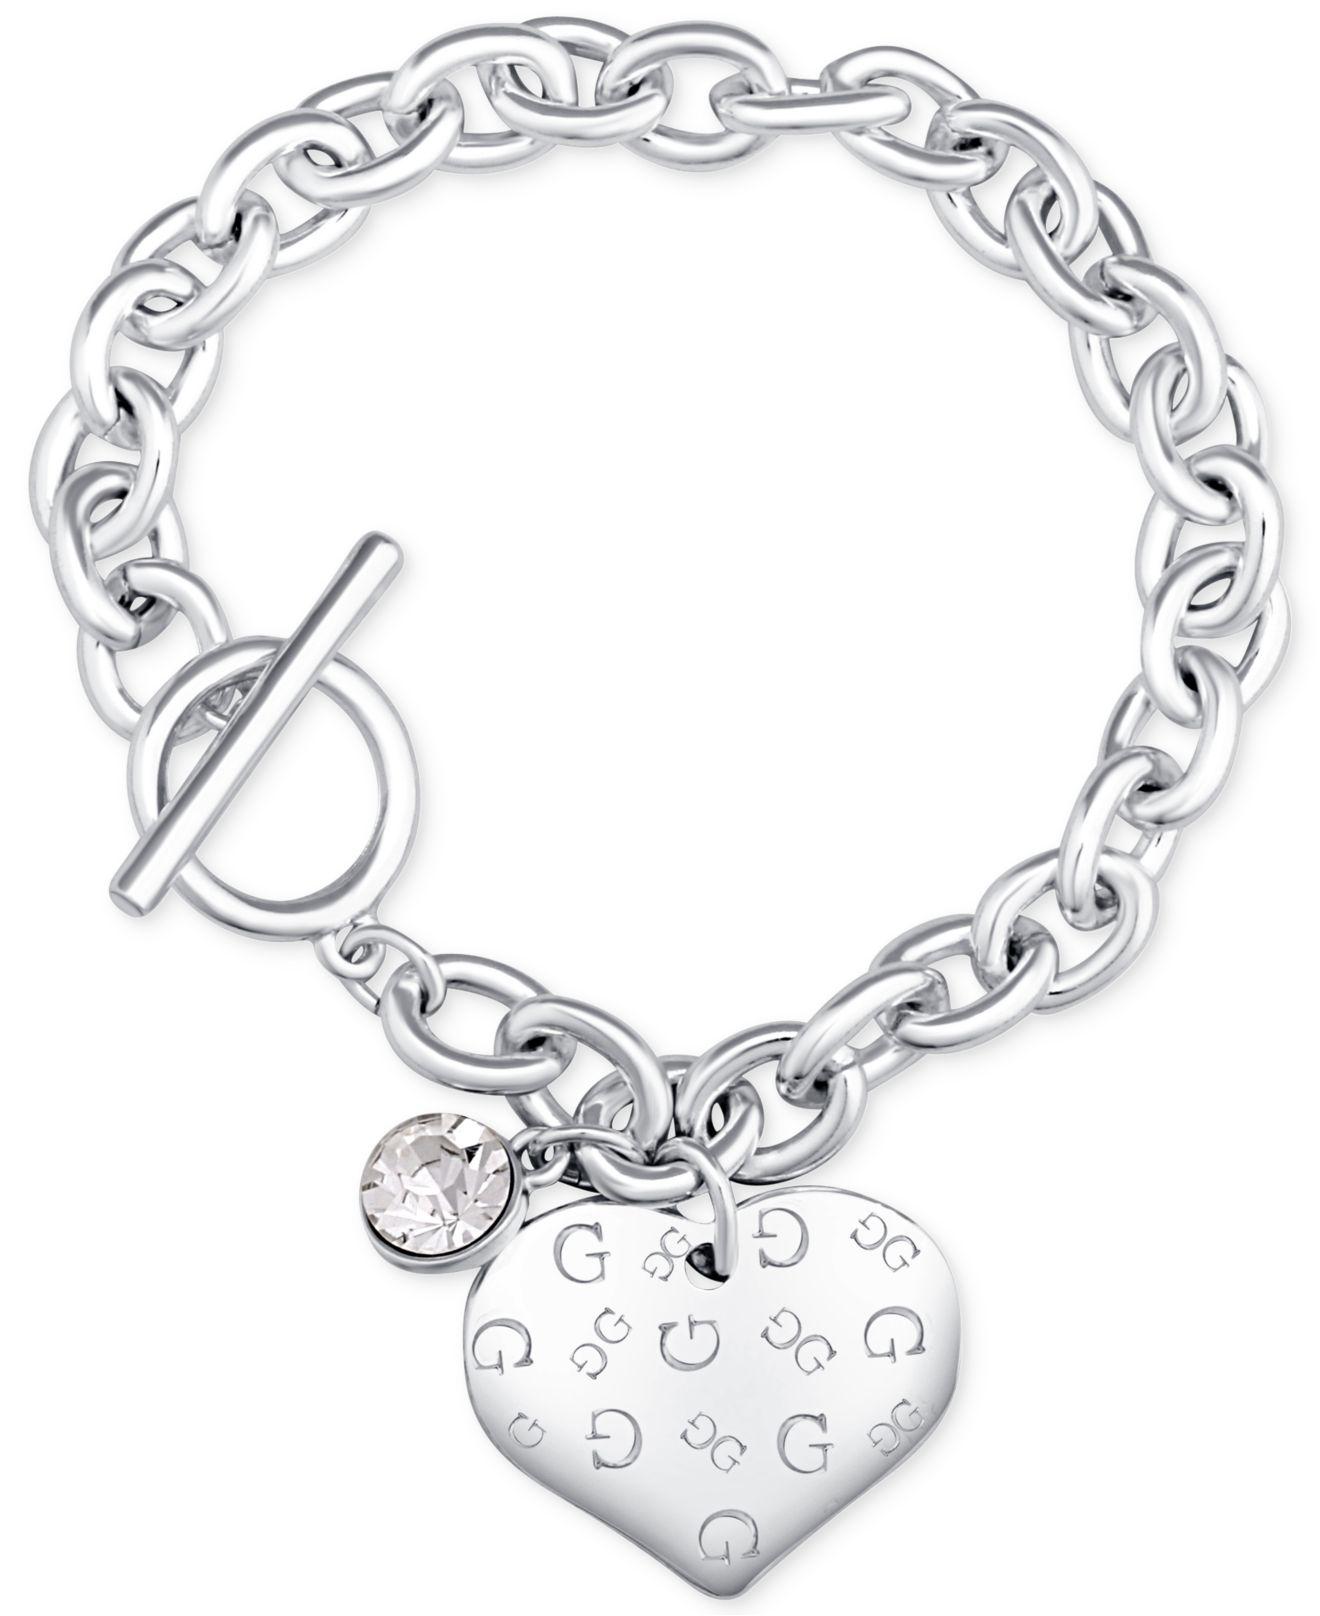 GUESS Toggle Link Bracelet with Heart Charms and Lock